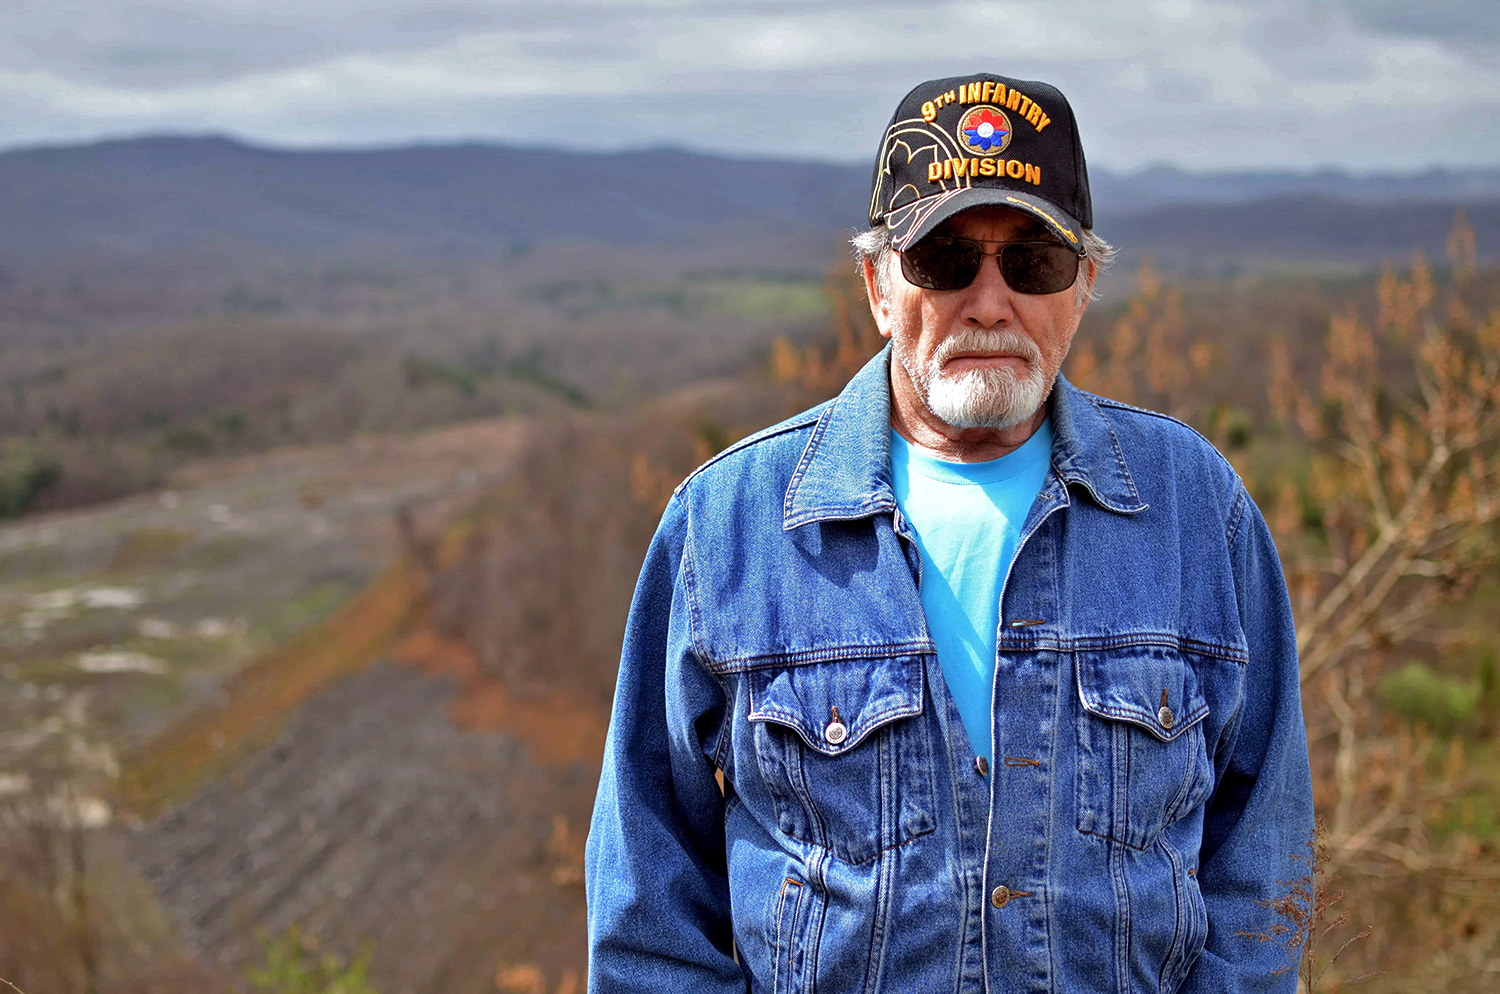 Larry Bush — a former coal miner, retired mine inspector and Vietnam War veteran — grew up hunting on this hill near Keokee, Va., which has been stripped for coal by companies run by the governor of West Virginia.